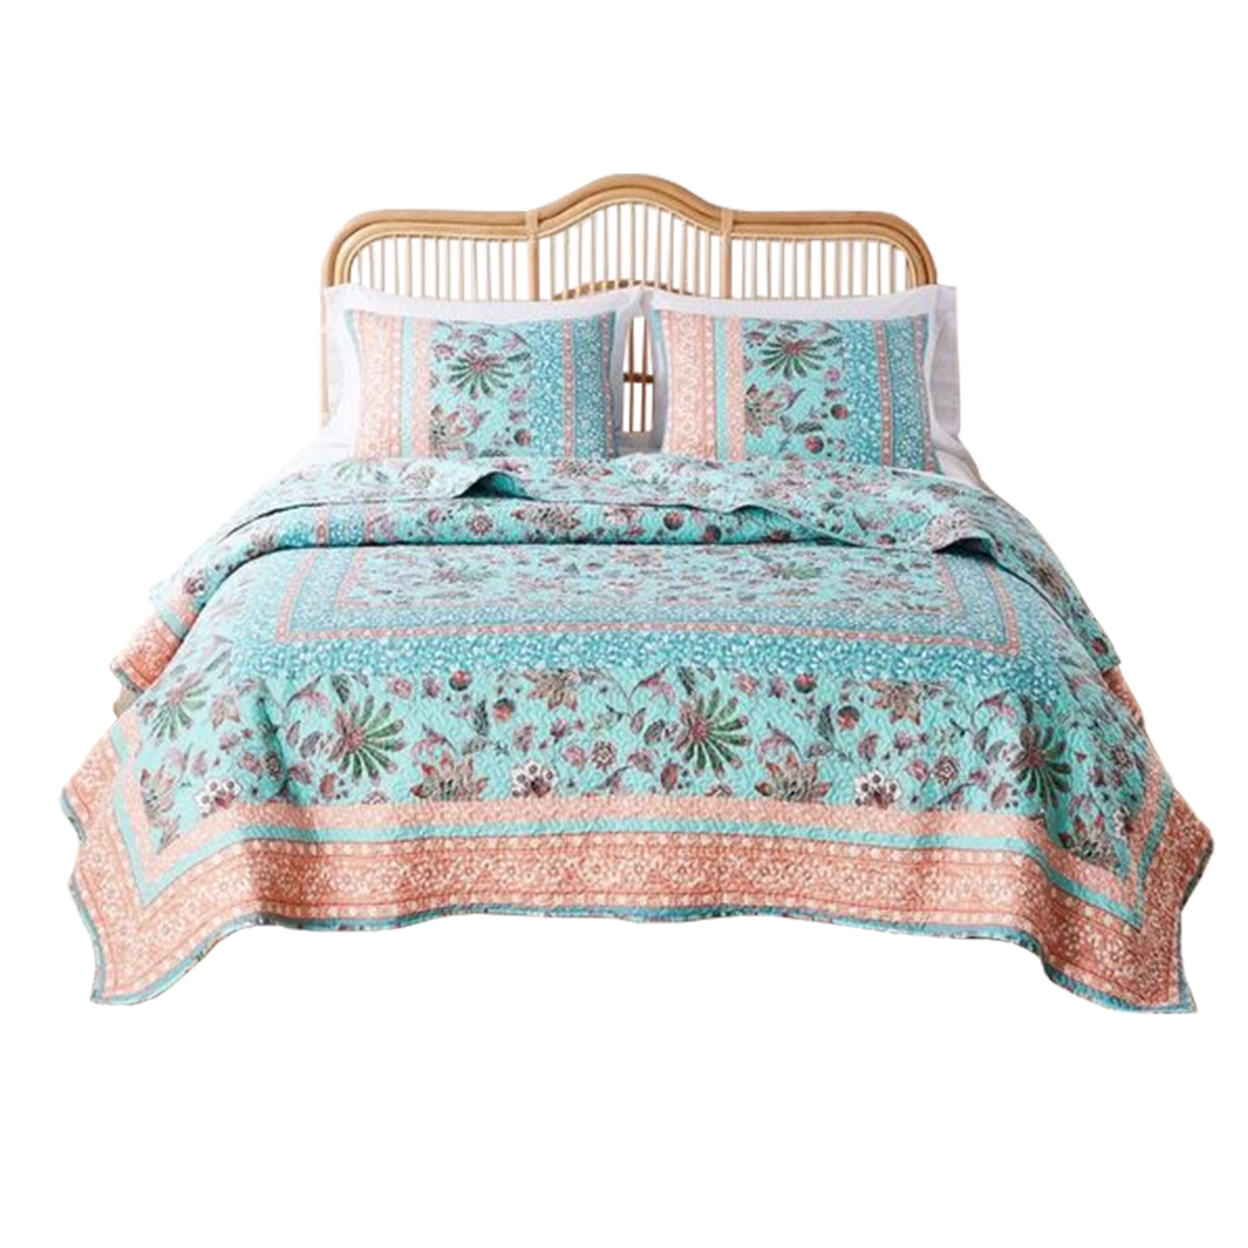 3 Piece King Quilt Set With Floral Print, Blue And White- Saltoro Sherpi